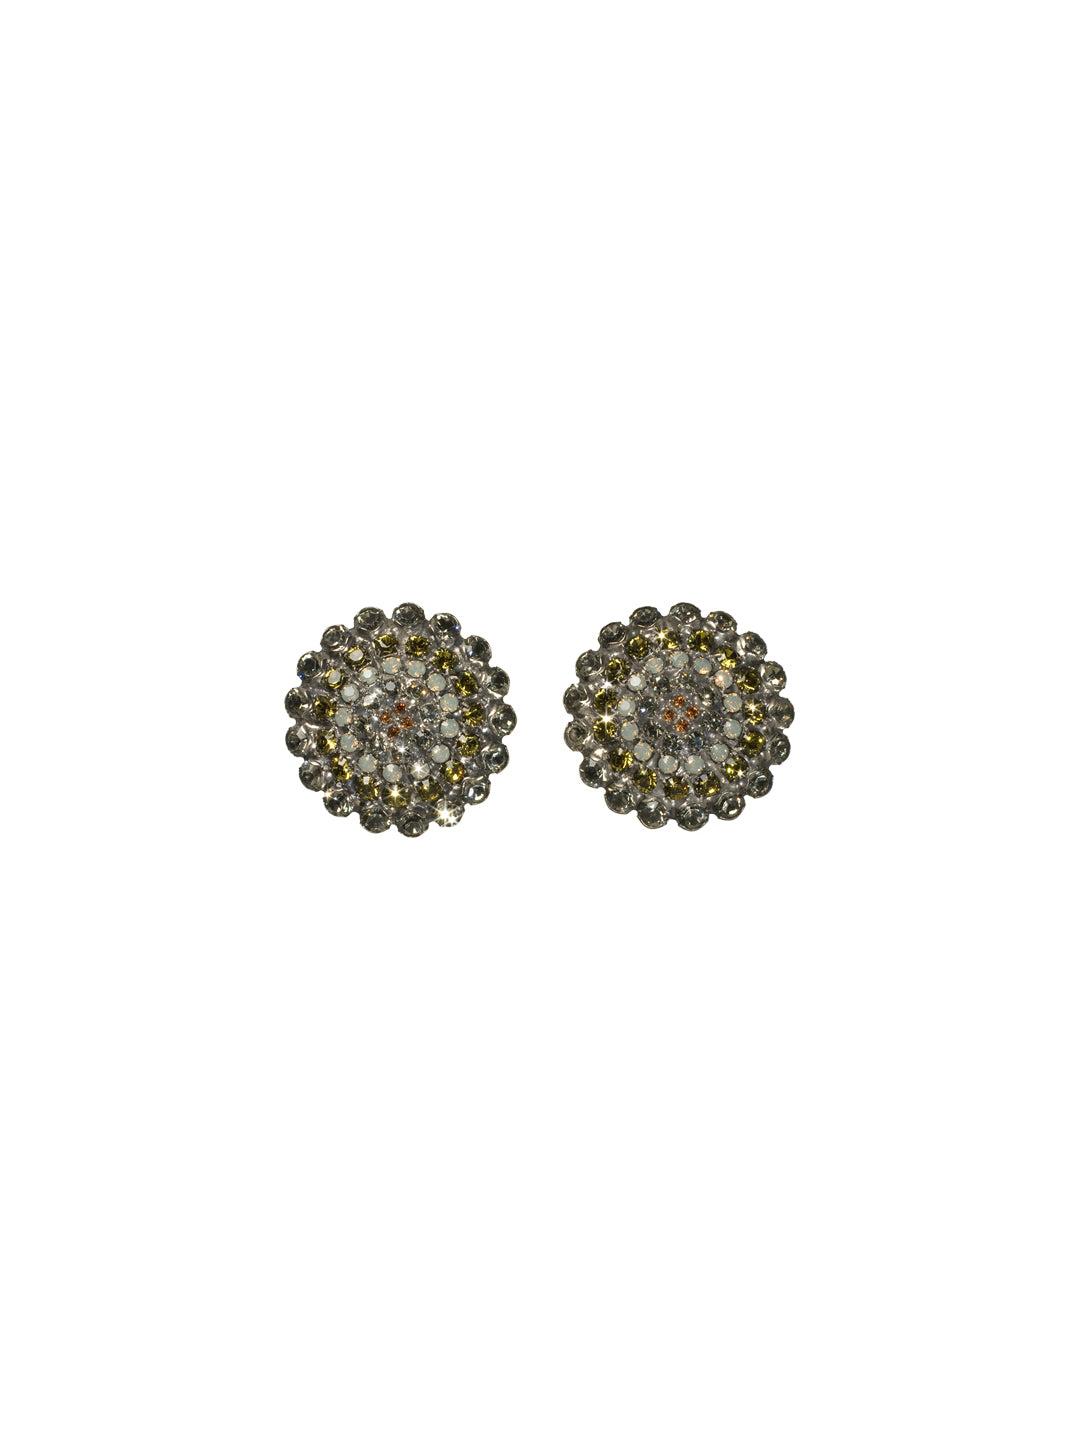 Crystal Target Clip Earring Stud Earrings - ECK1CASCJ - A classic Sorrelli style to make a statement or wear everyday. From Sorrelli's Concrete Jungle collection in our Antique Silver-tone finish.